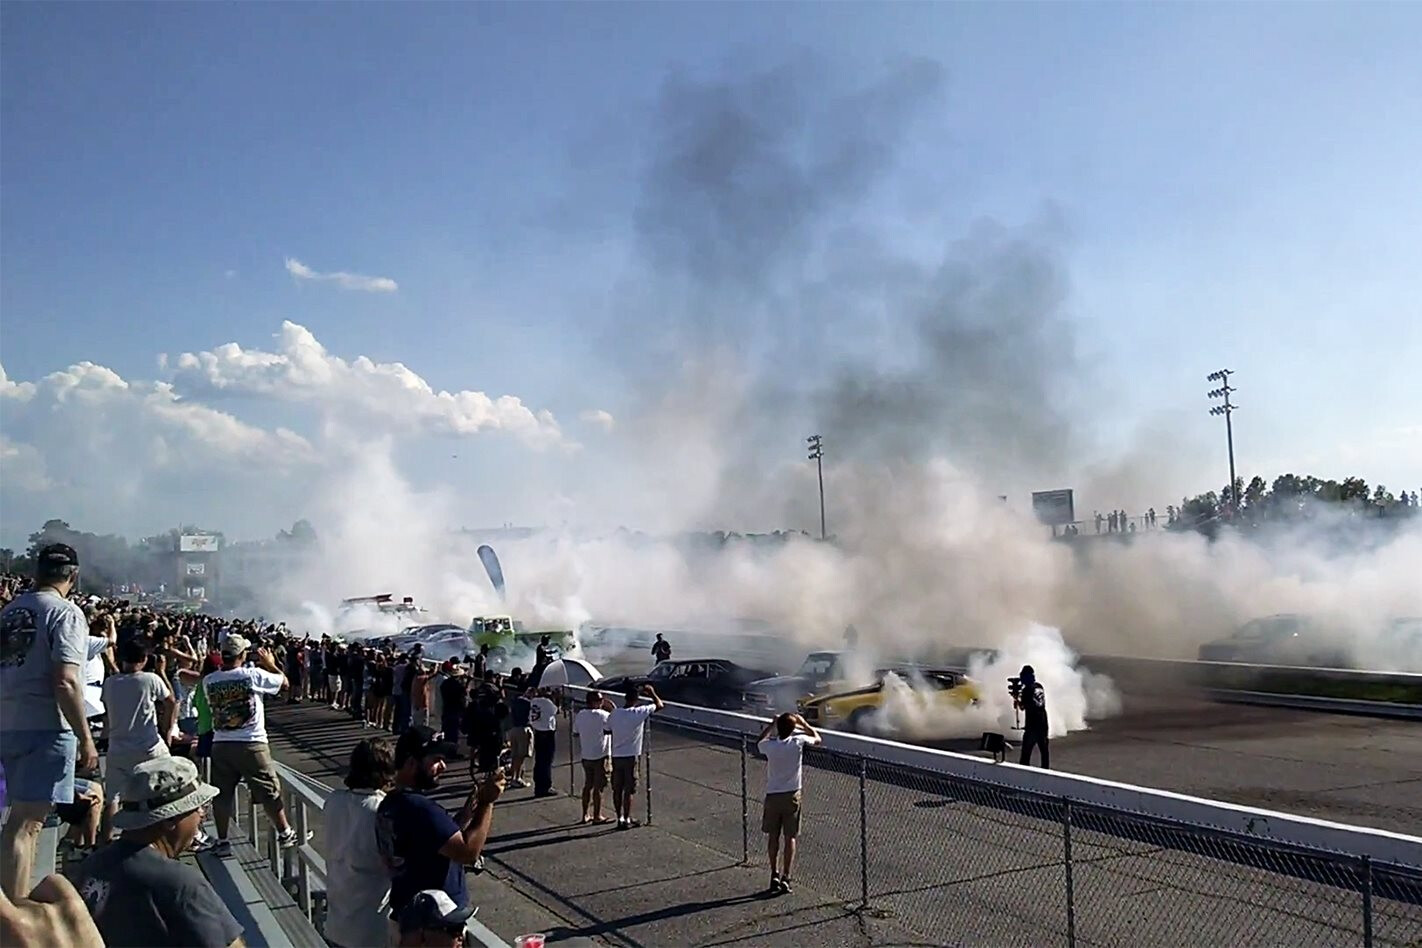 VIDEO: YANKS STEAL BACK THE GUINESS WORLD RECORD BURNOUT TITLE